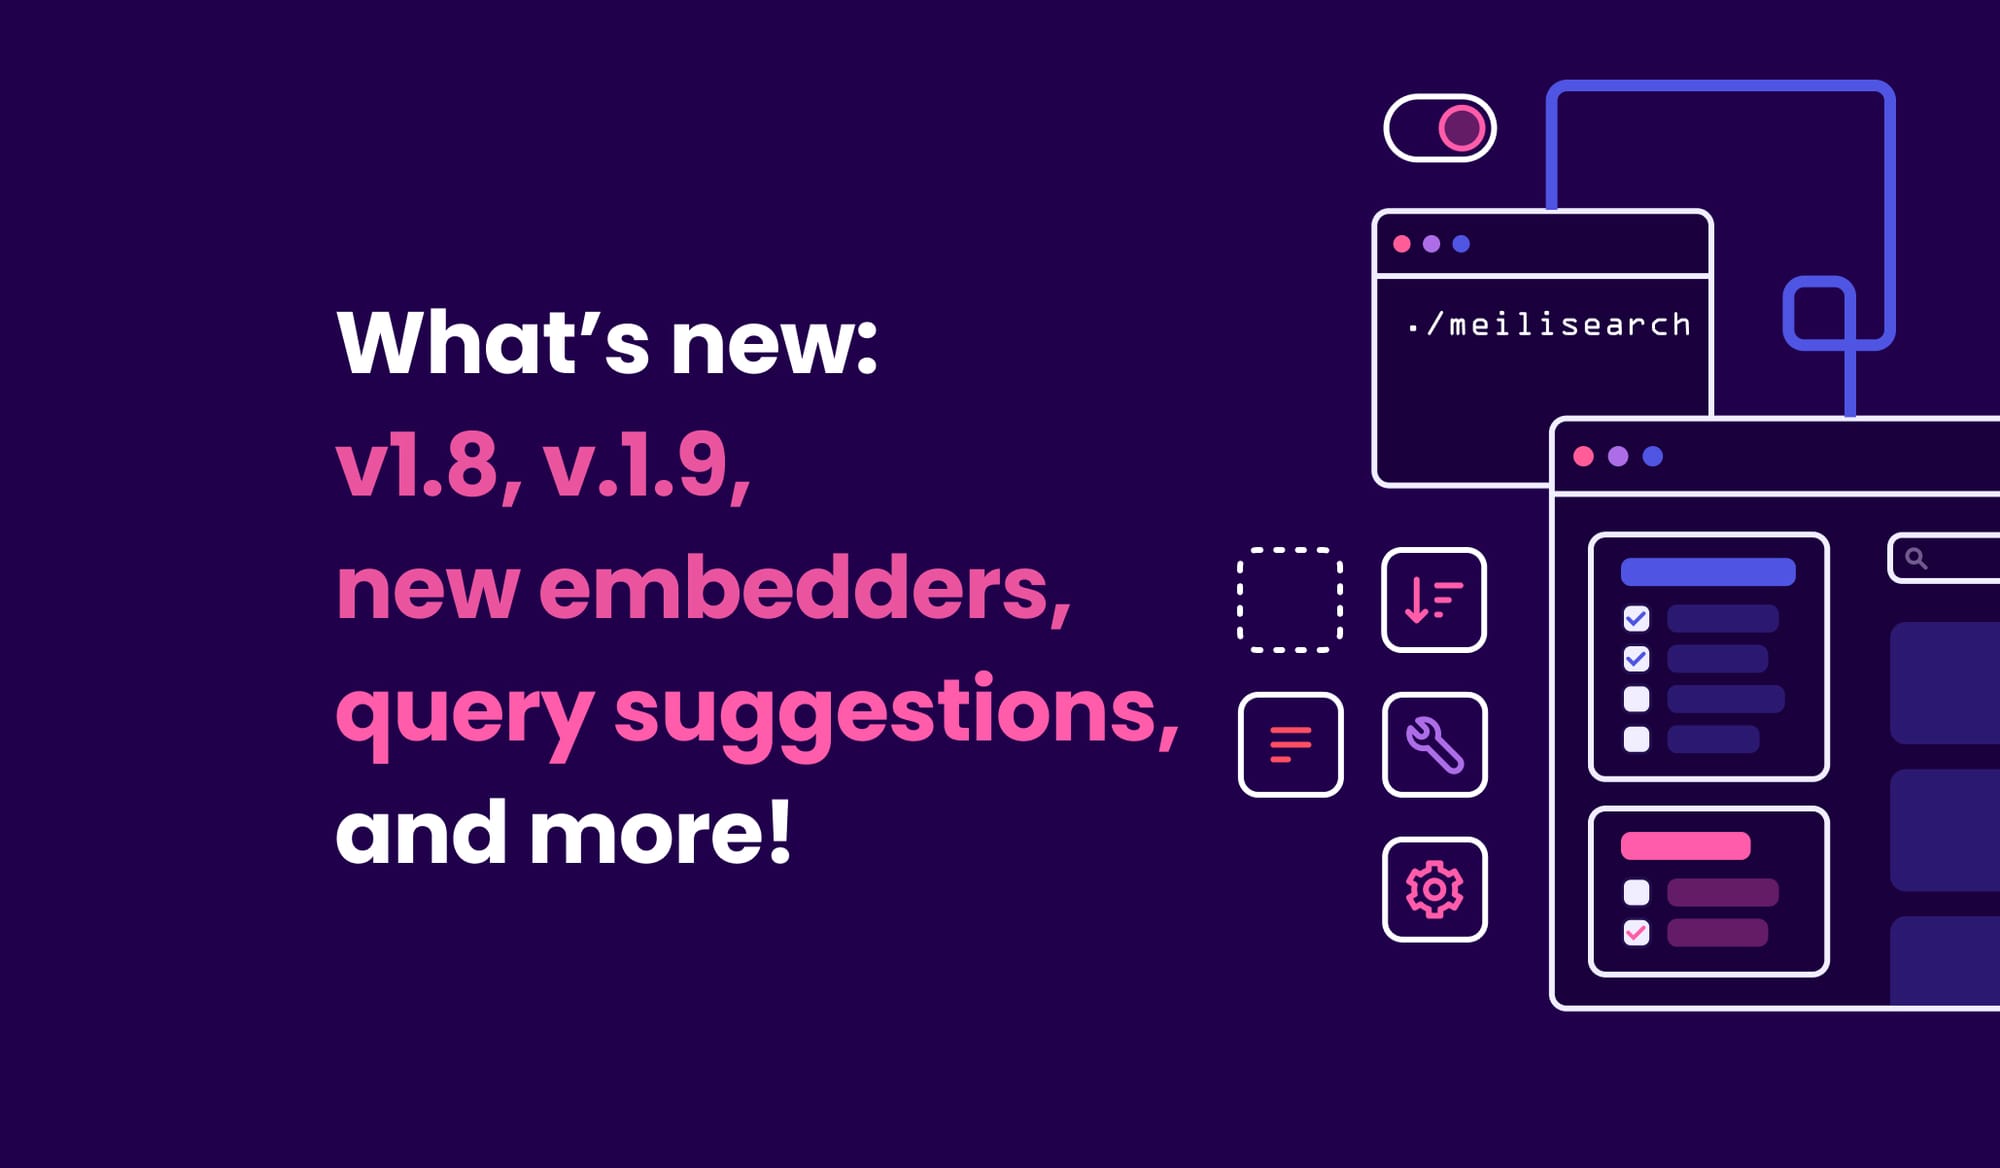 Here's what you missed in the latest Meilisearch live event: V1.8, V1.9, new embedders, query suggestions, and more.